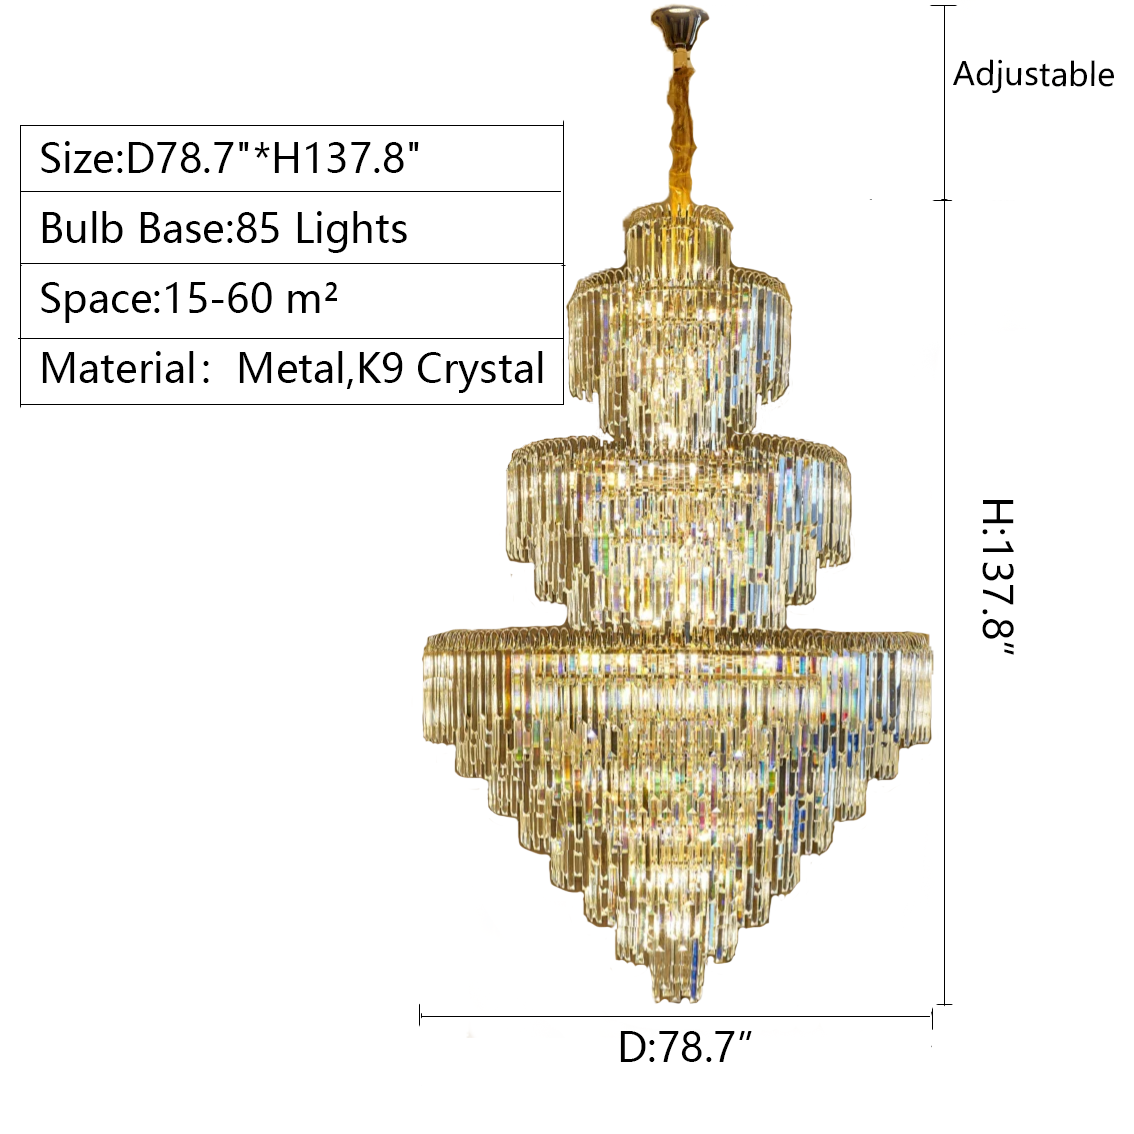 3 Layers Extra Large Living Room Chandelier Luxury Foyer Entryway Crystal Light Fixture Chandeliers Kevinstudiolives D78.7"*H137.8"/ 85 Lights Warm Light 